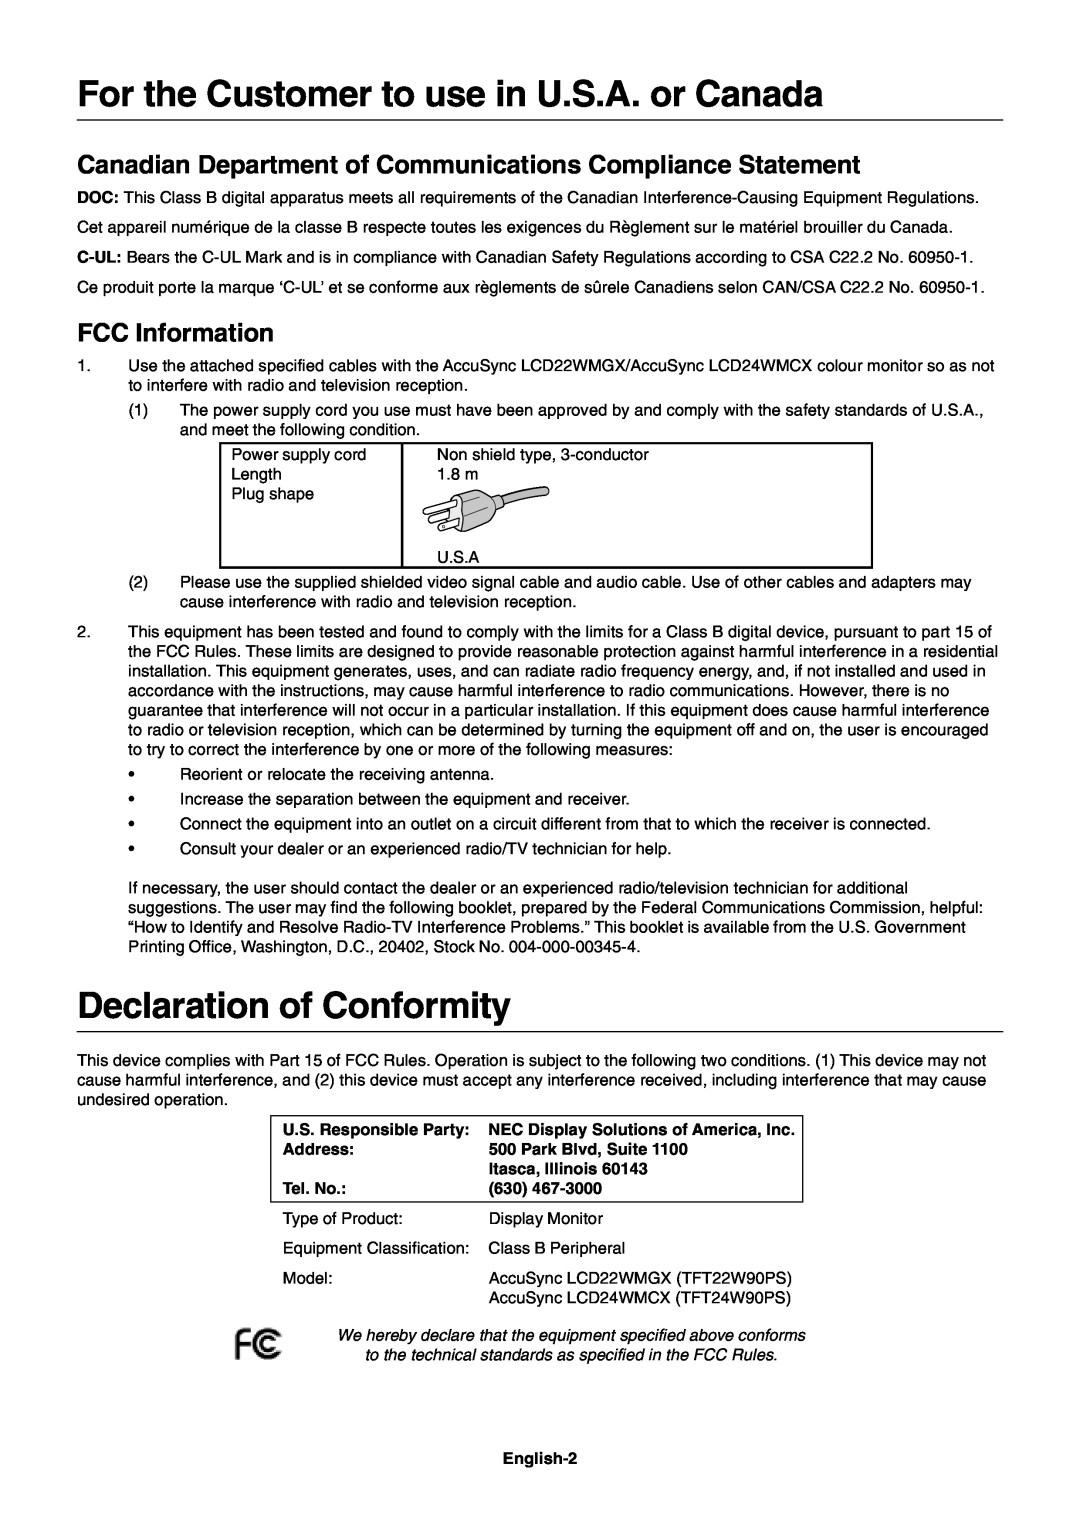 NEC LCD22WMGX user manual For the Customer to use in U.S.A. or Canada, Declaration of Conformity, FCC Information 